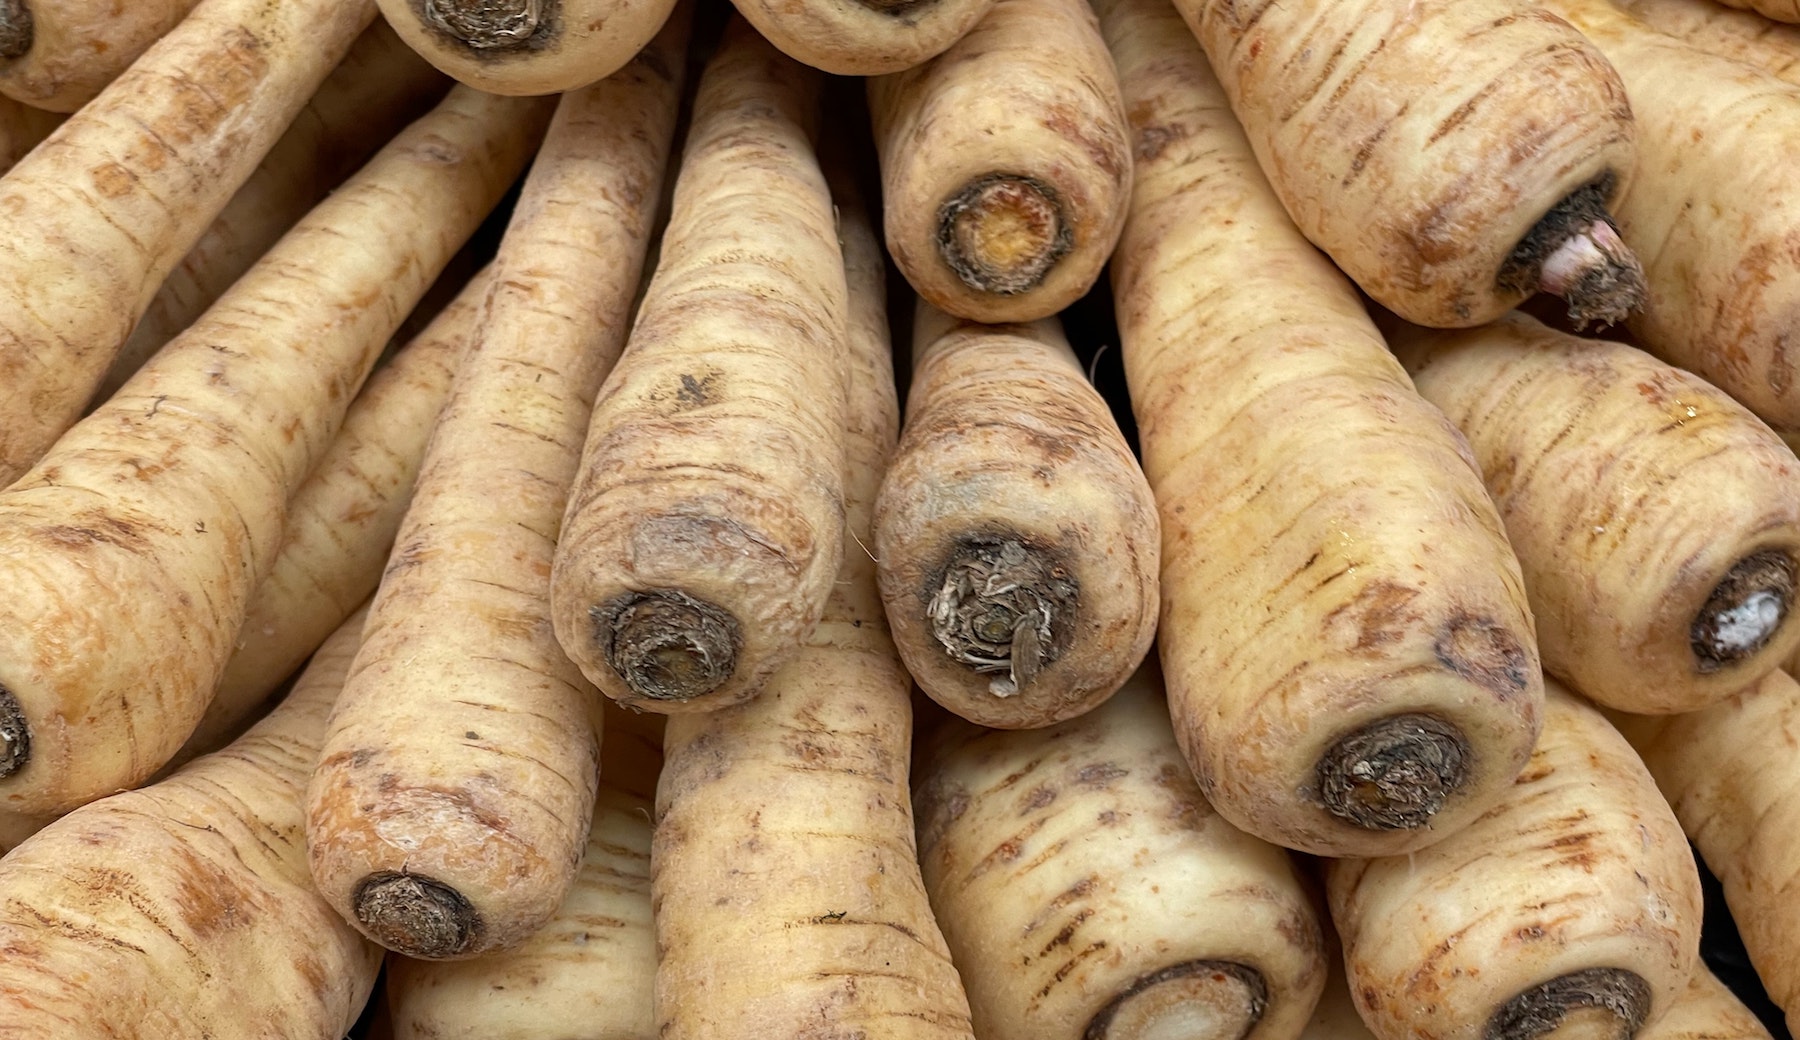 How to plant parsnips from seed